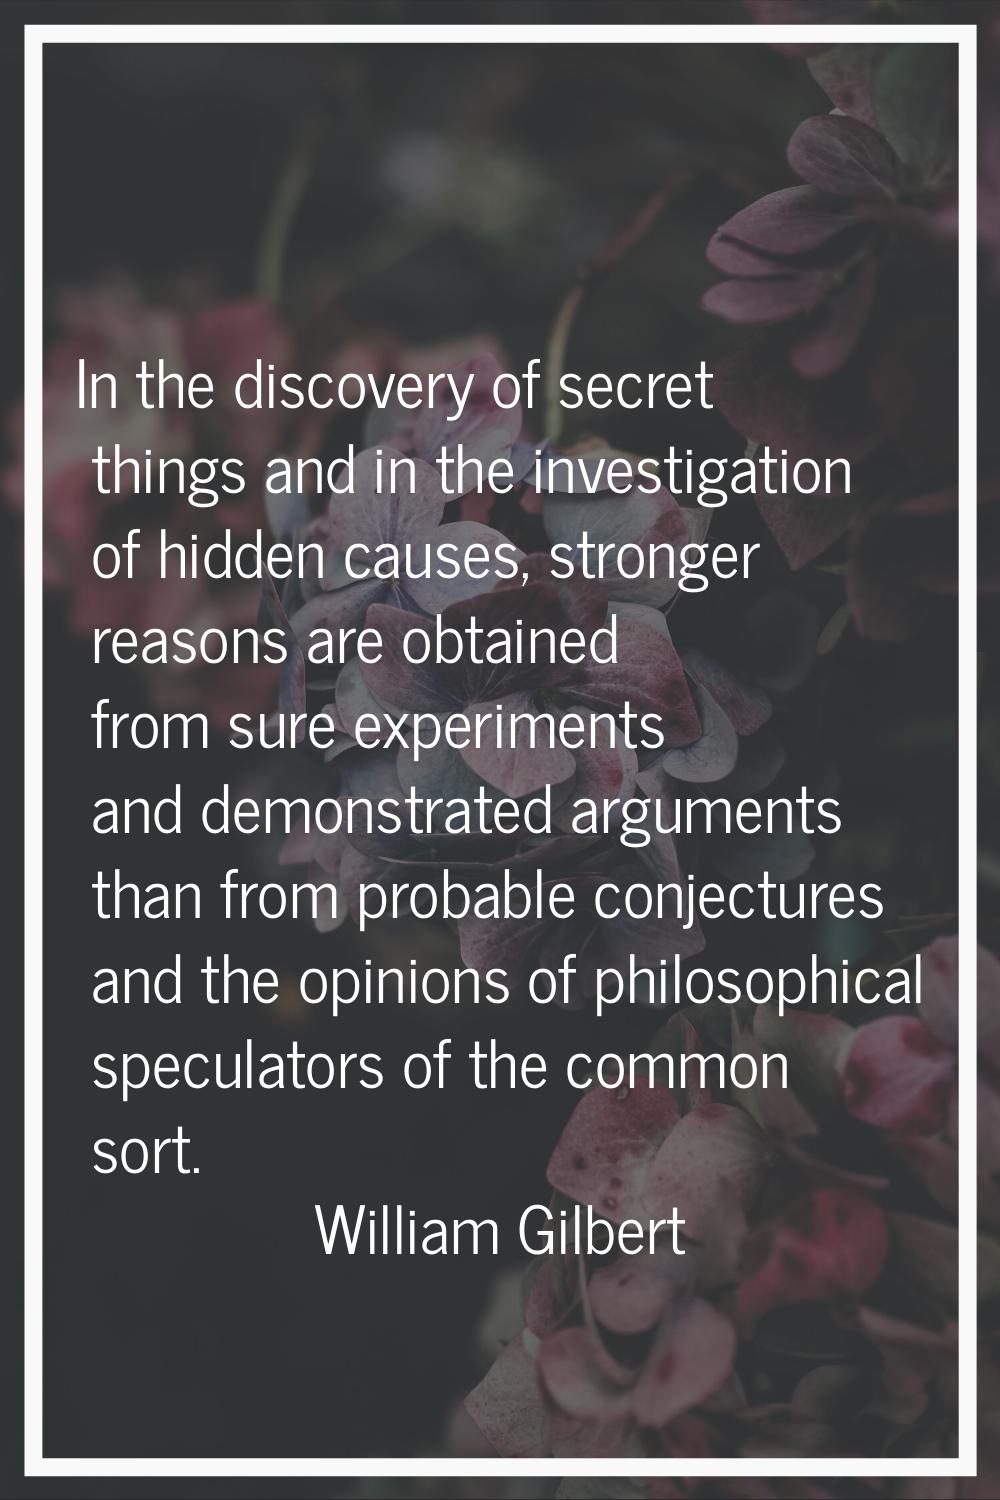 In the discovery of secret things and in the investigation of hidden causes, stronger reasons are o